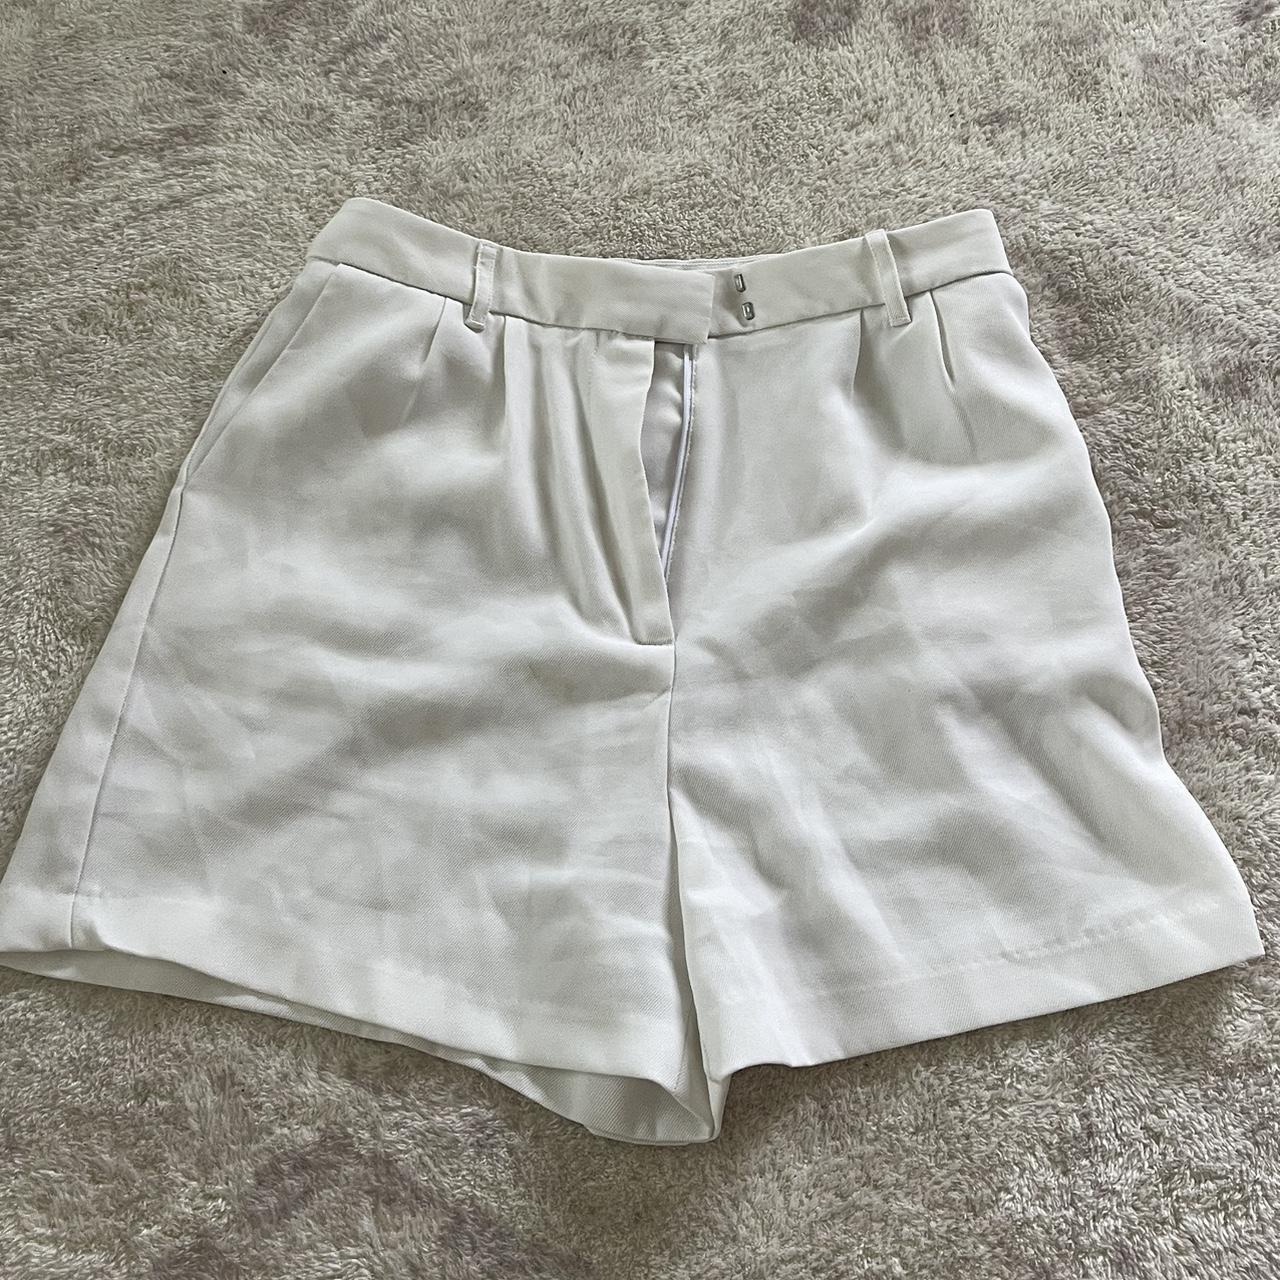 Kookai Shorts - can’t remember the style sorry! - Depop